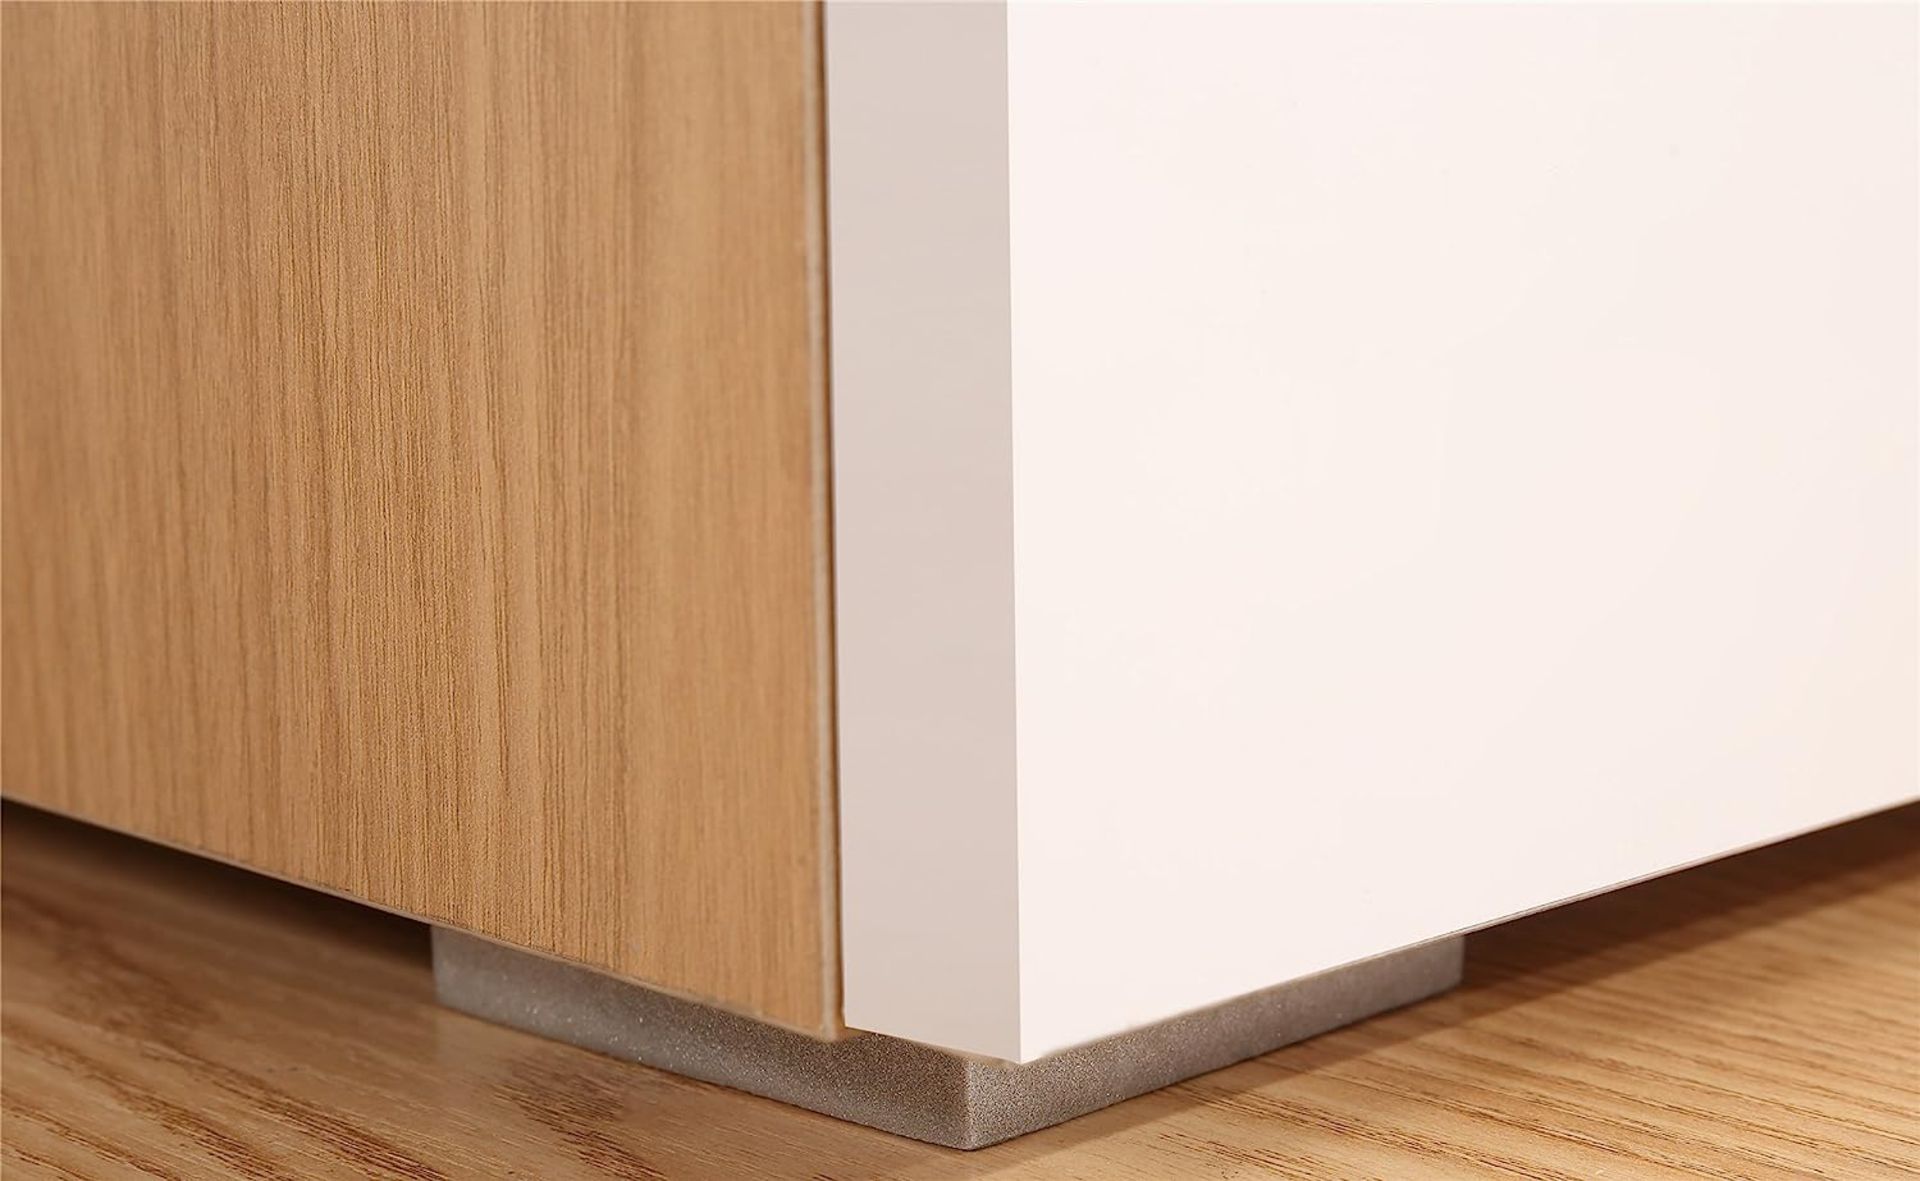 5 X BRAND NEW HARMIN MODERN 160CM TV STAND CABINET UNIT WITH HIGH GLOSS DOORS (WHITE ON OAK) - Image 9 of 9